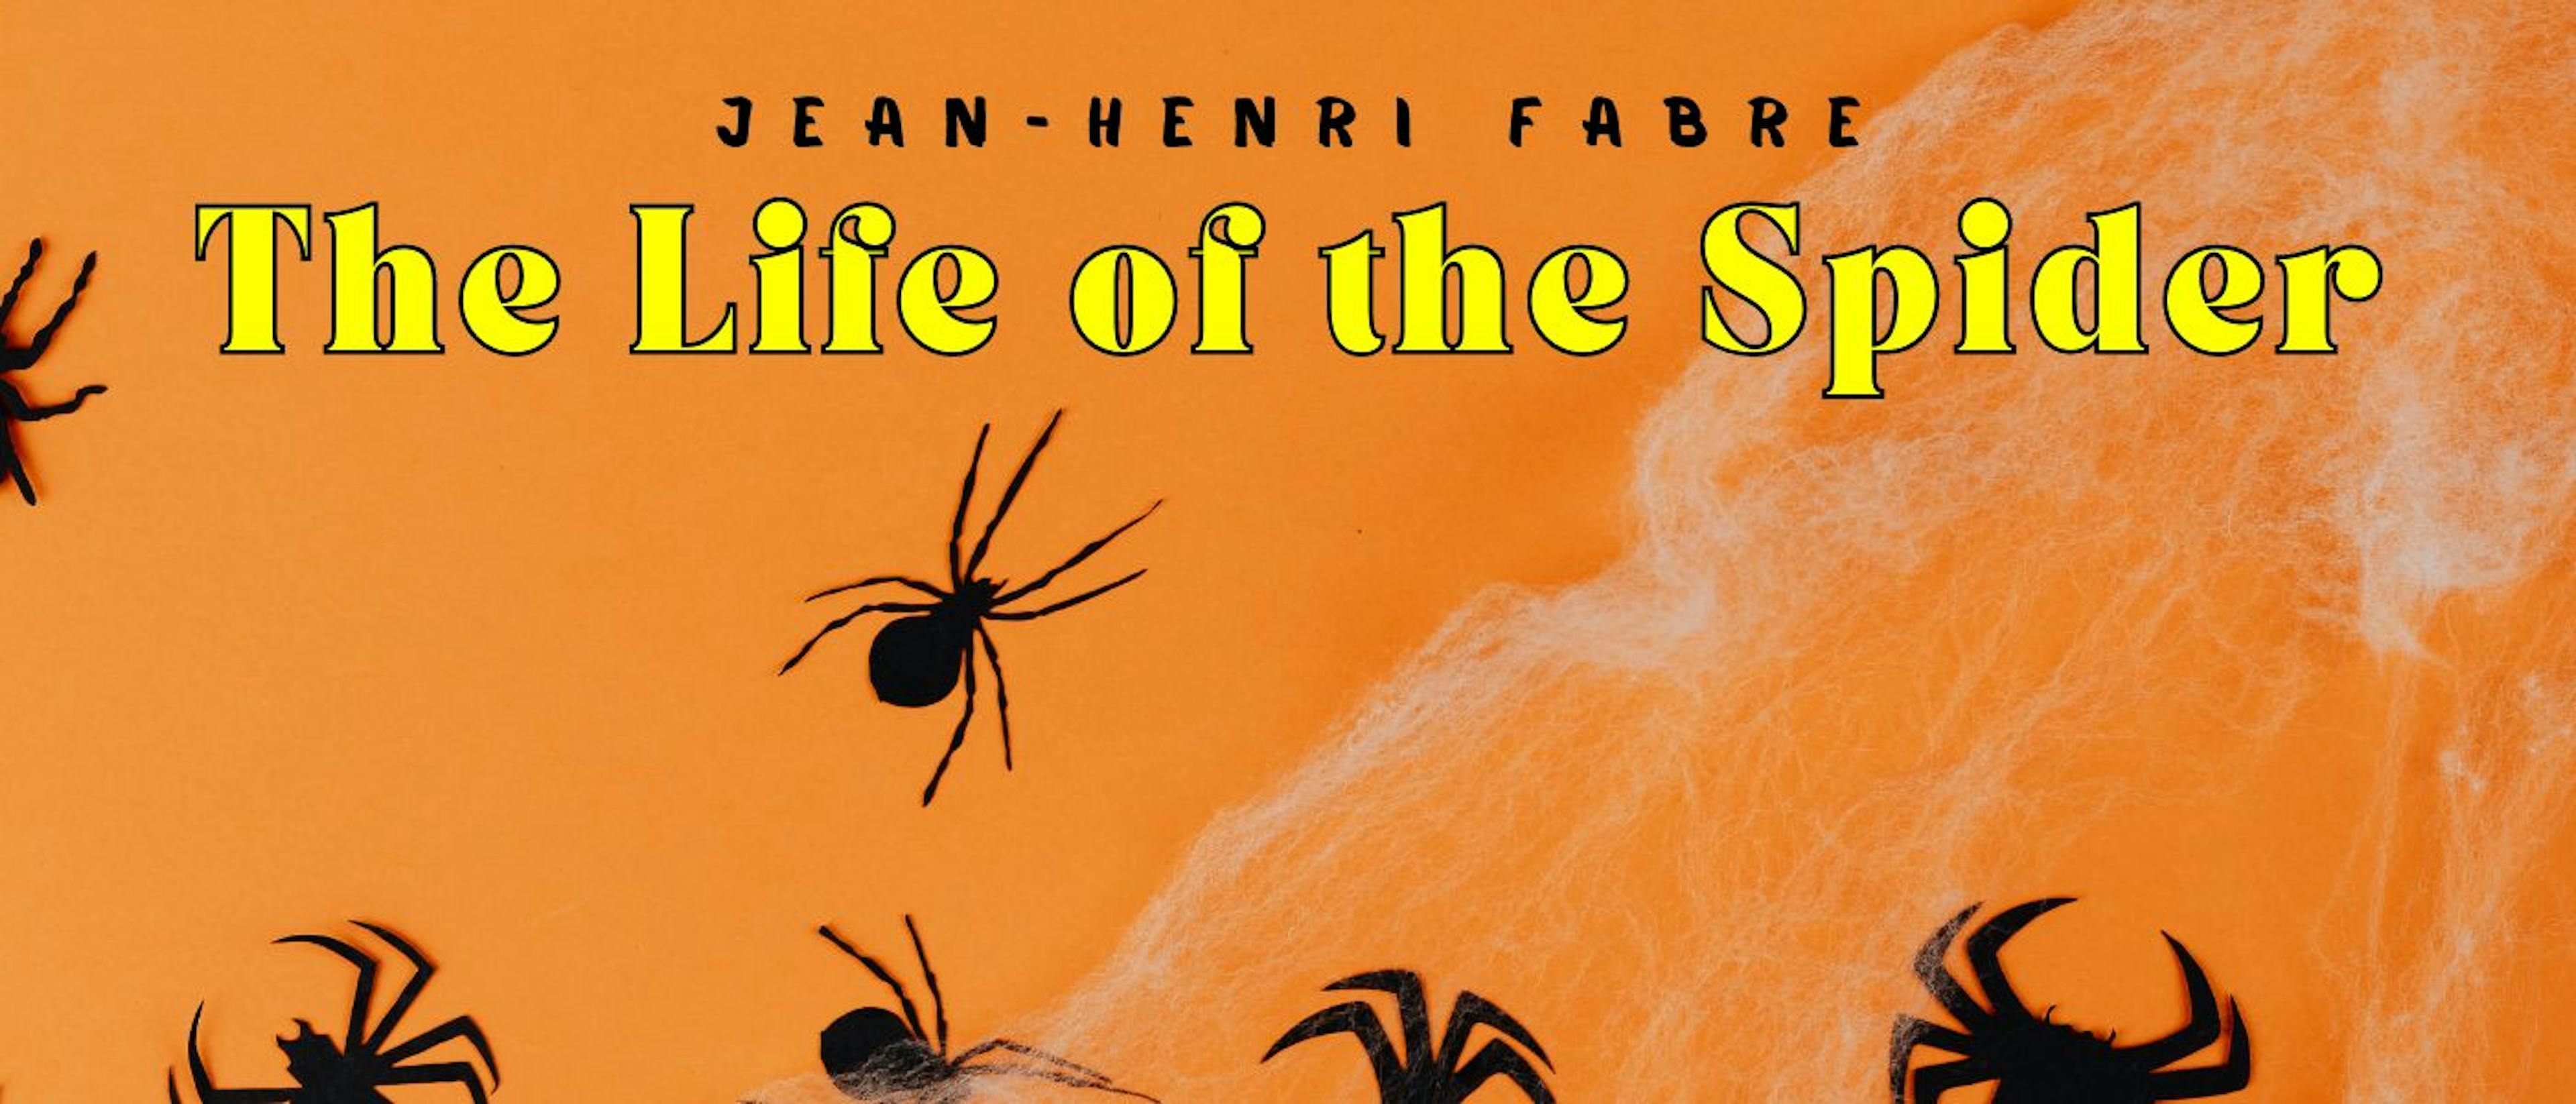 featured image - The Life of the Spider by Jean-Henri Fabre - Table of Links